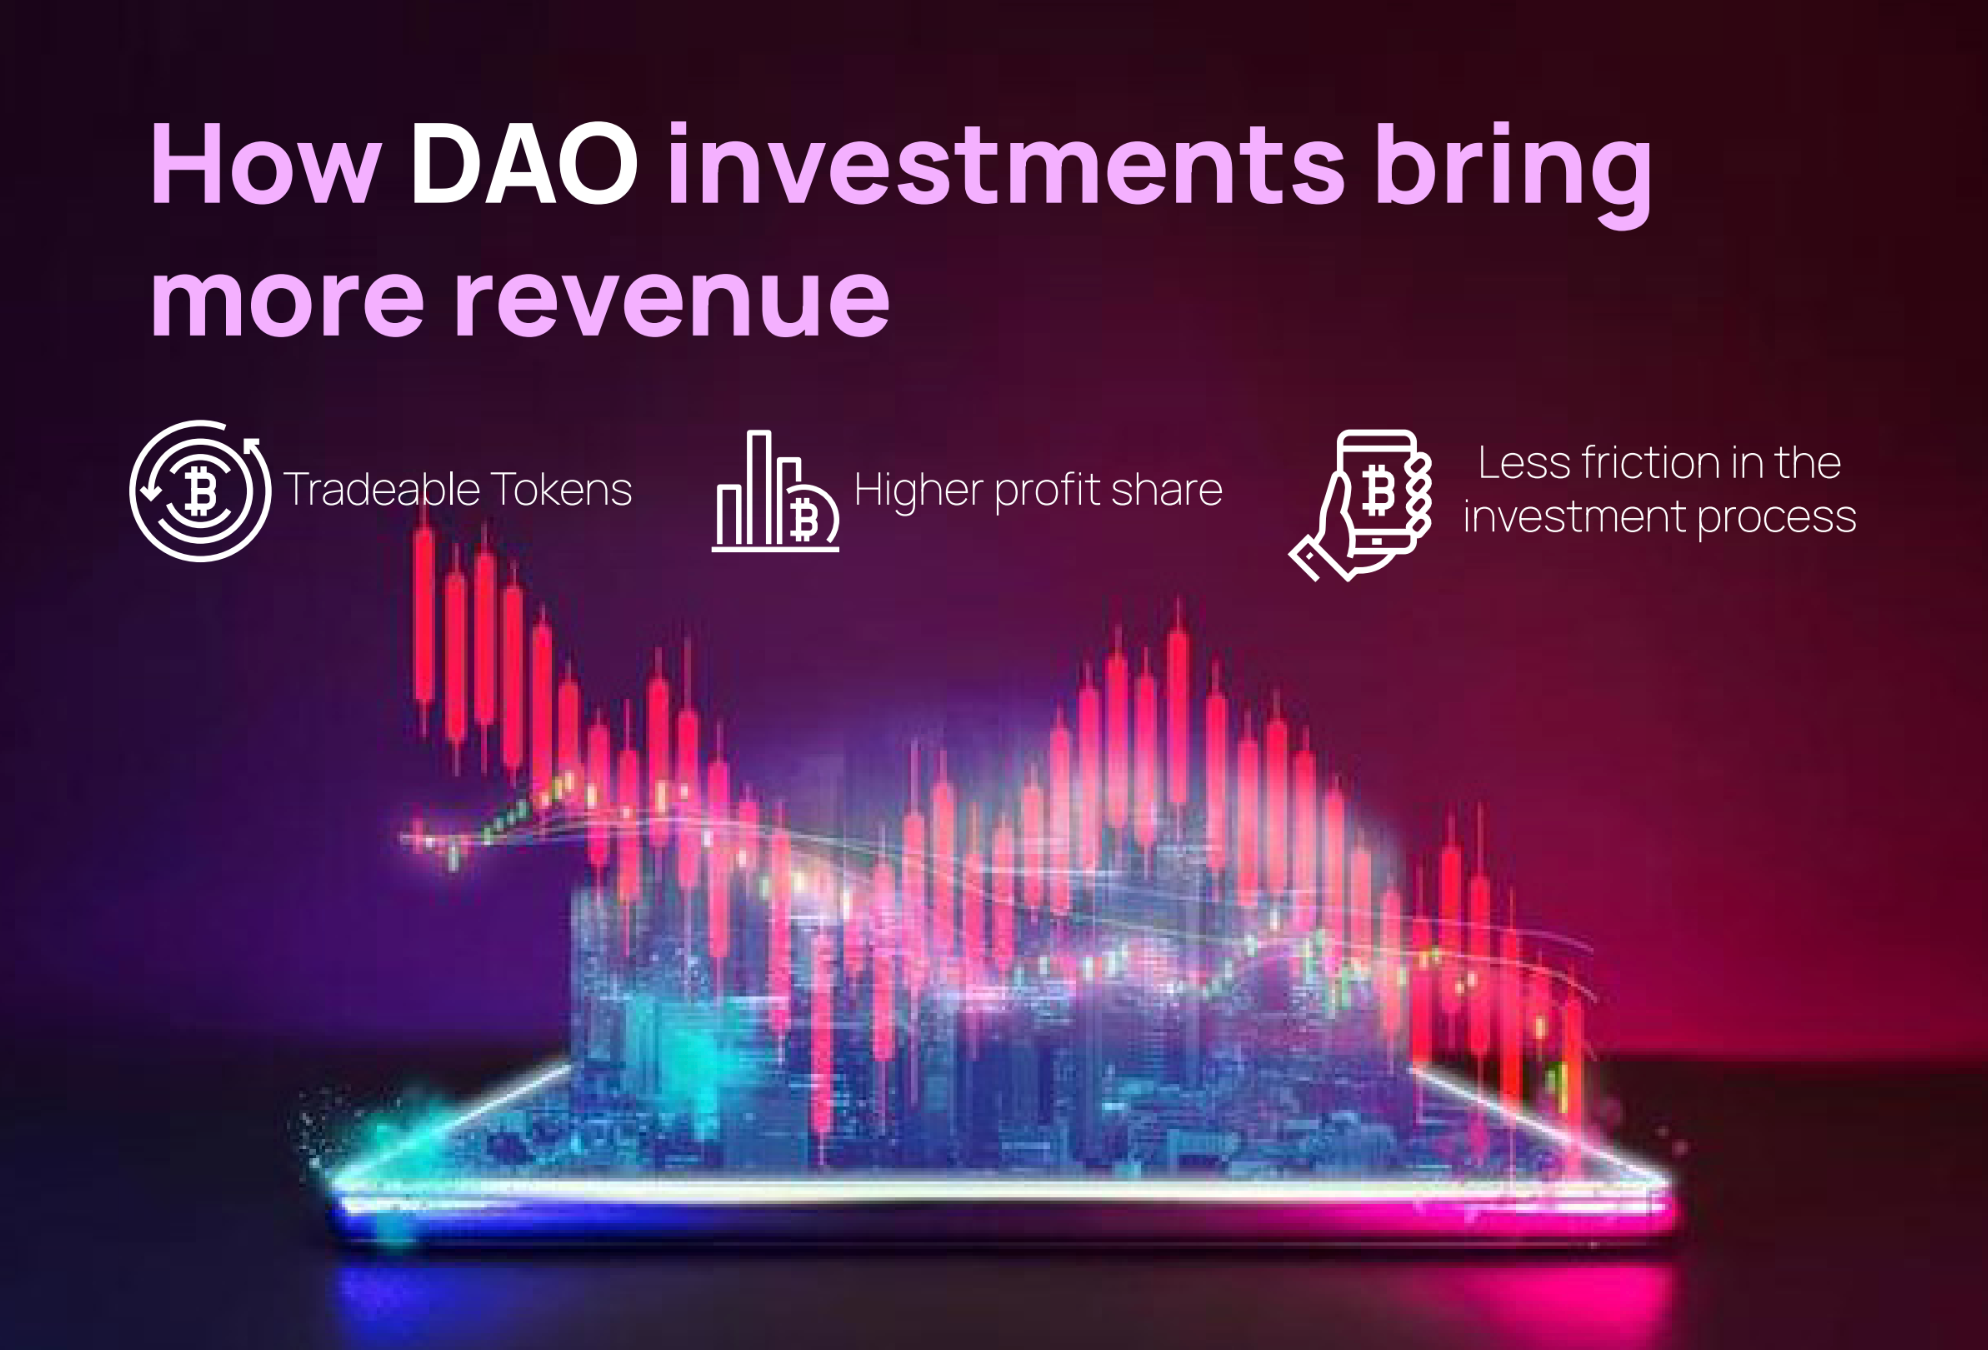 How can DAO investments bring more revenue?